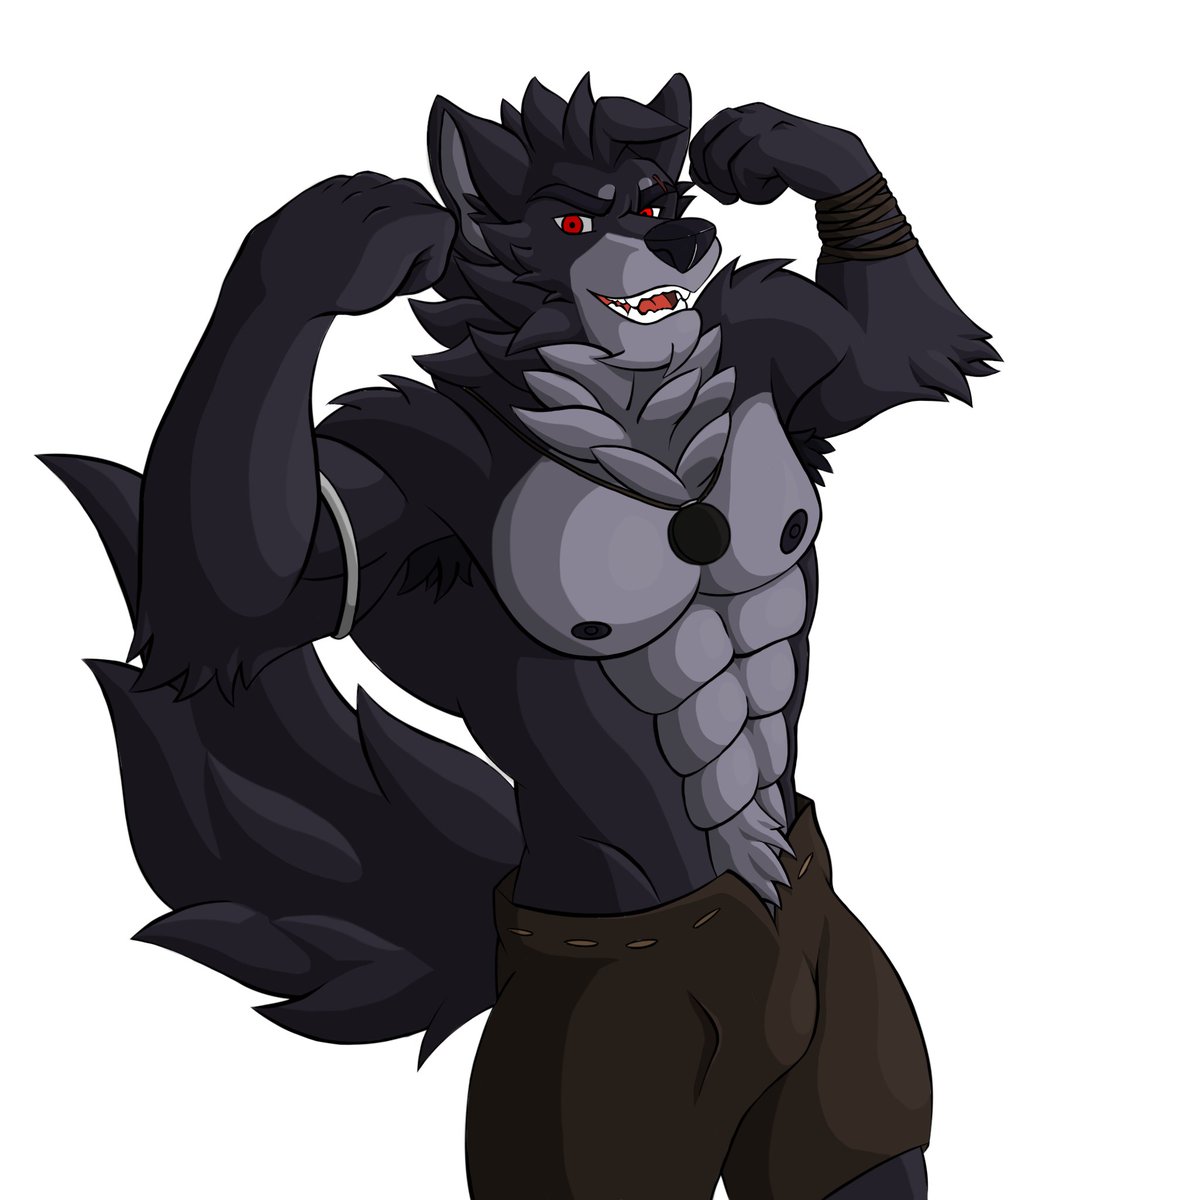 Quickkplays Looks Like Vulgor Wanted To Show Off His Muscles Too I Tried Out Some More Dynamic Lighting For This One Character Designed By Kael Tiger From Far Beyond The World